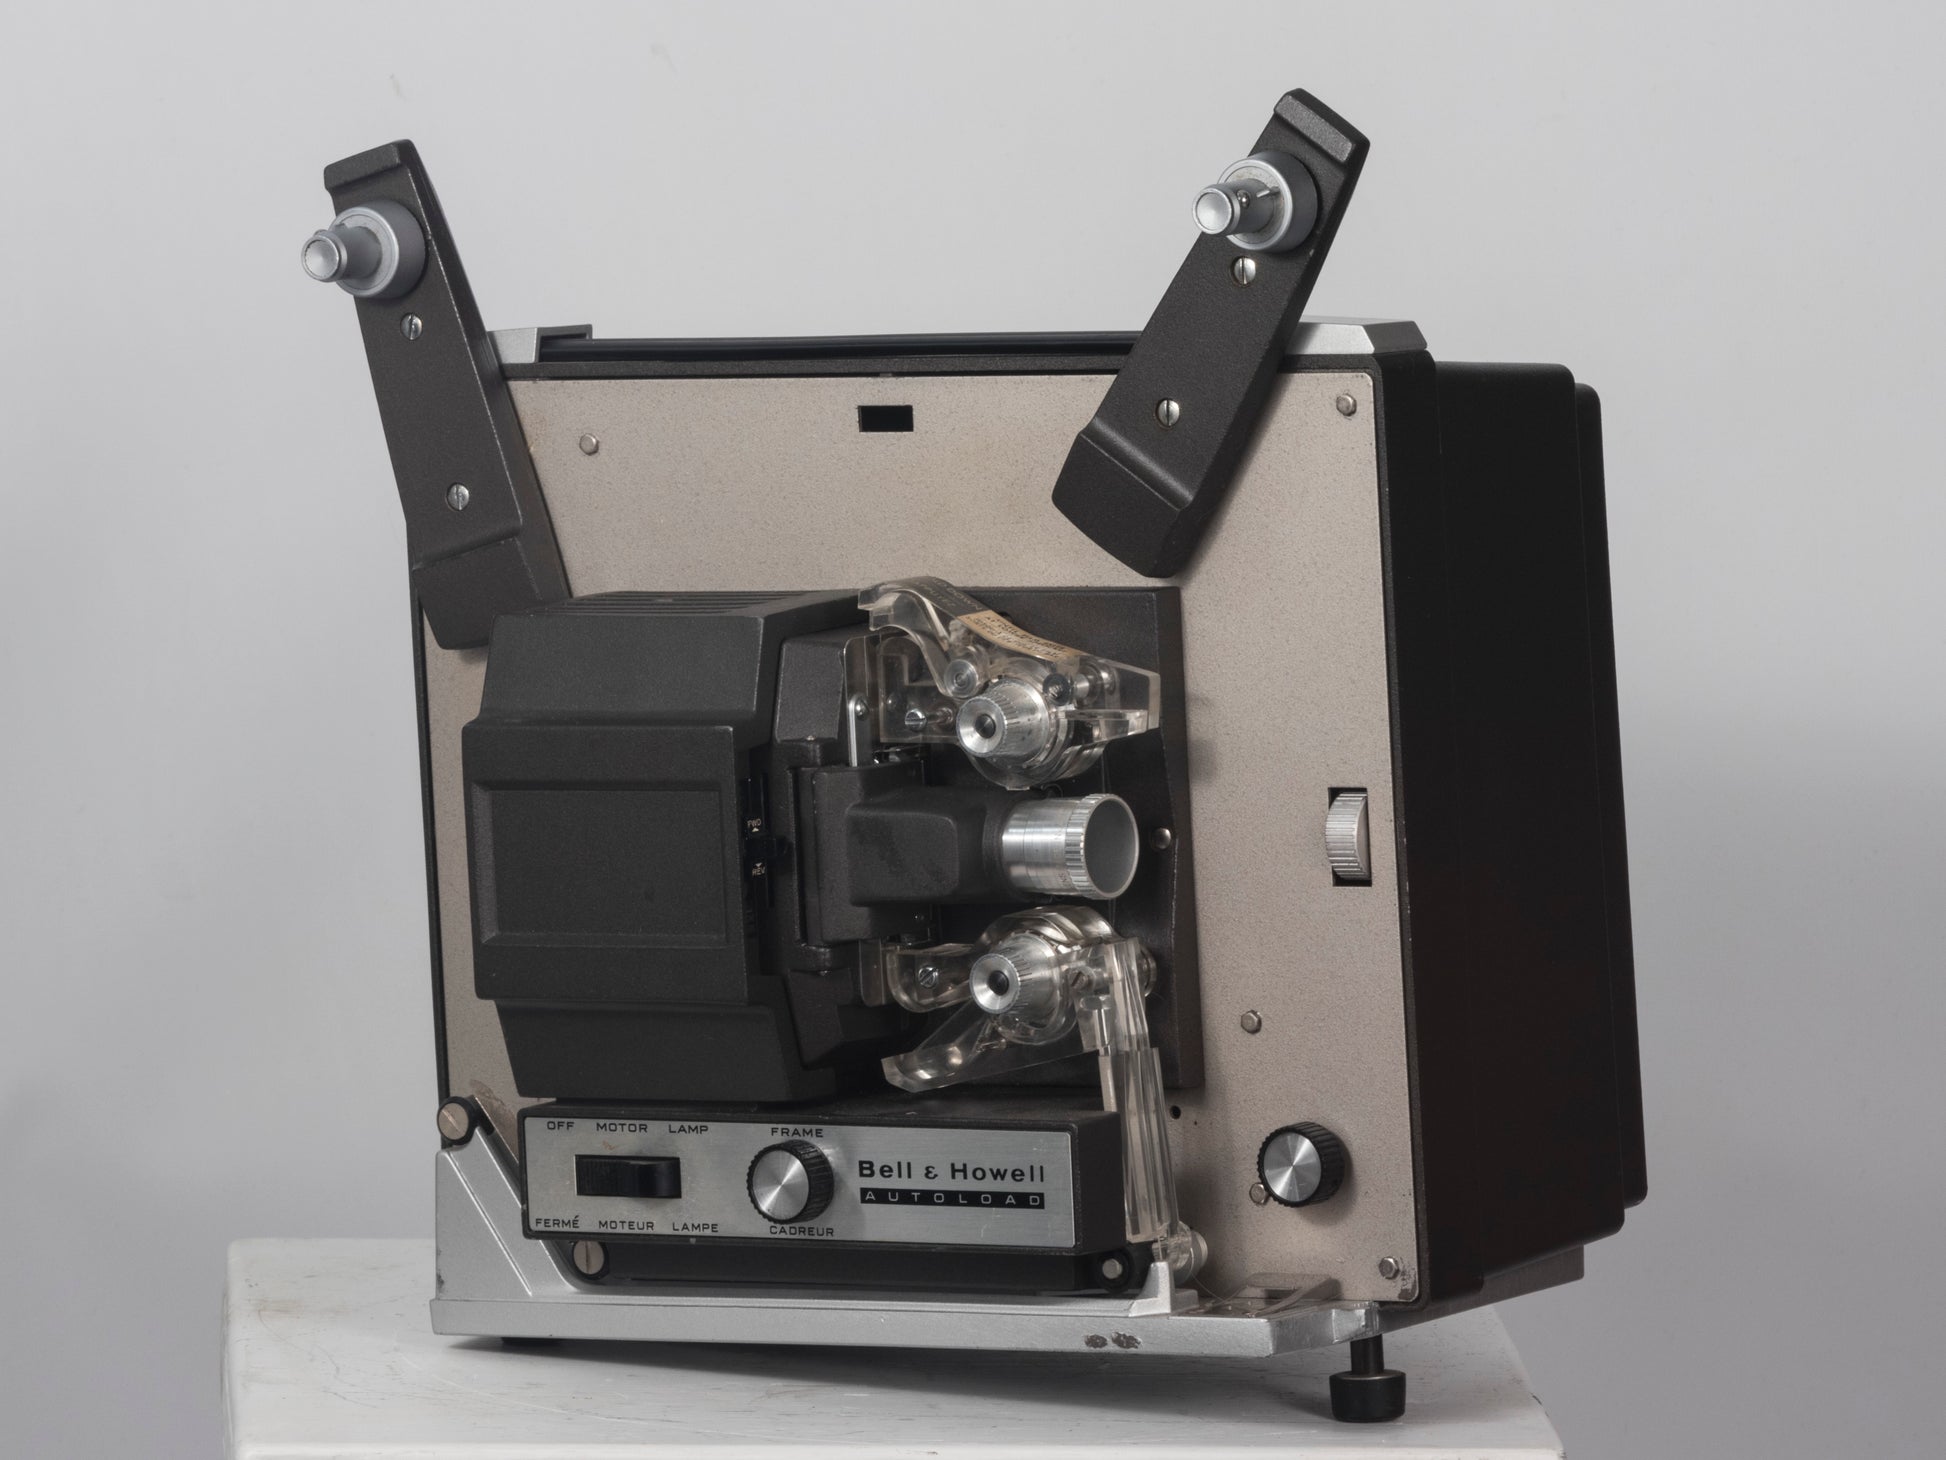 Bell and Howell Autoload 357 Super 8 movie projector. Shown without reels.